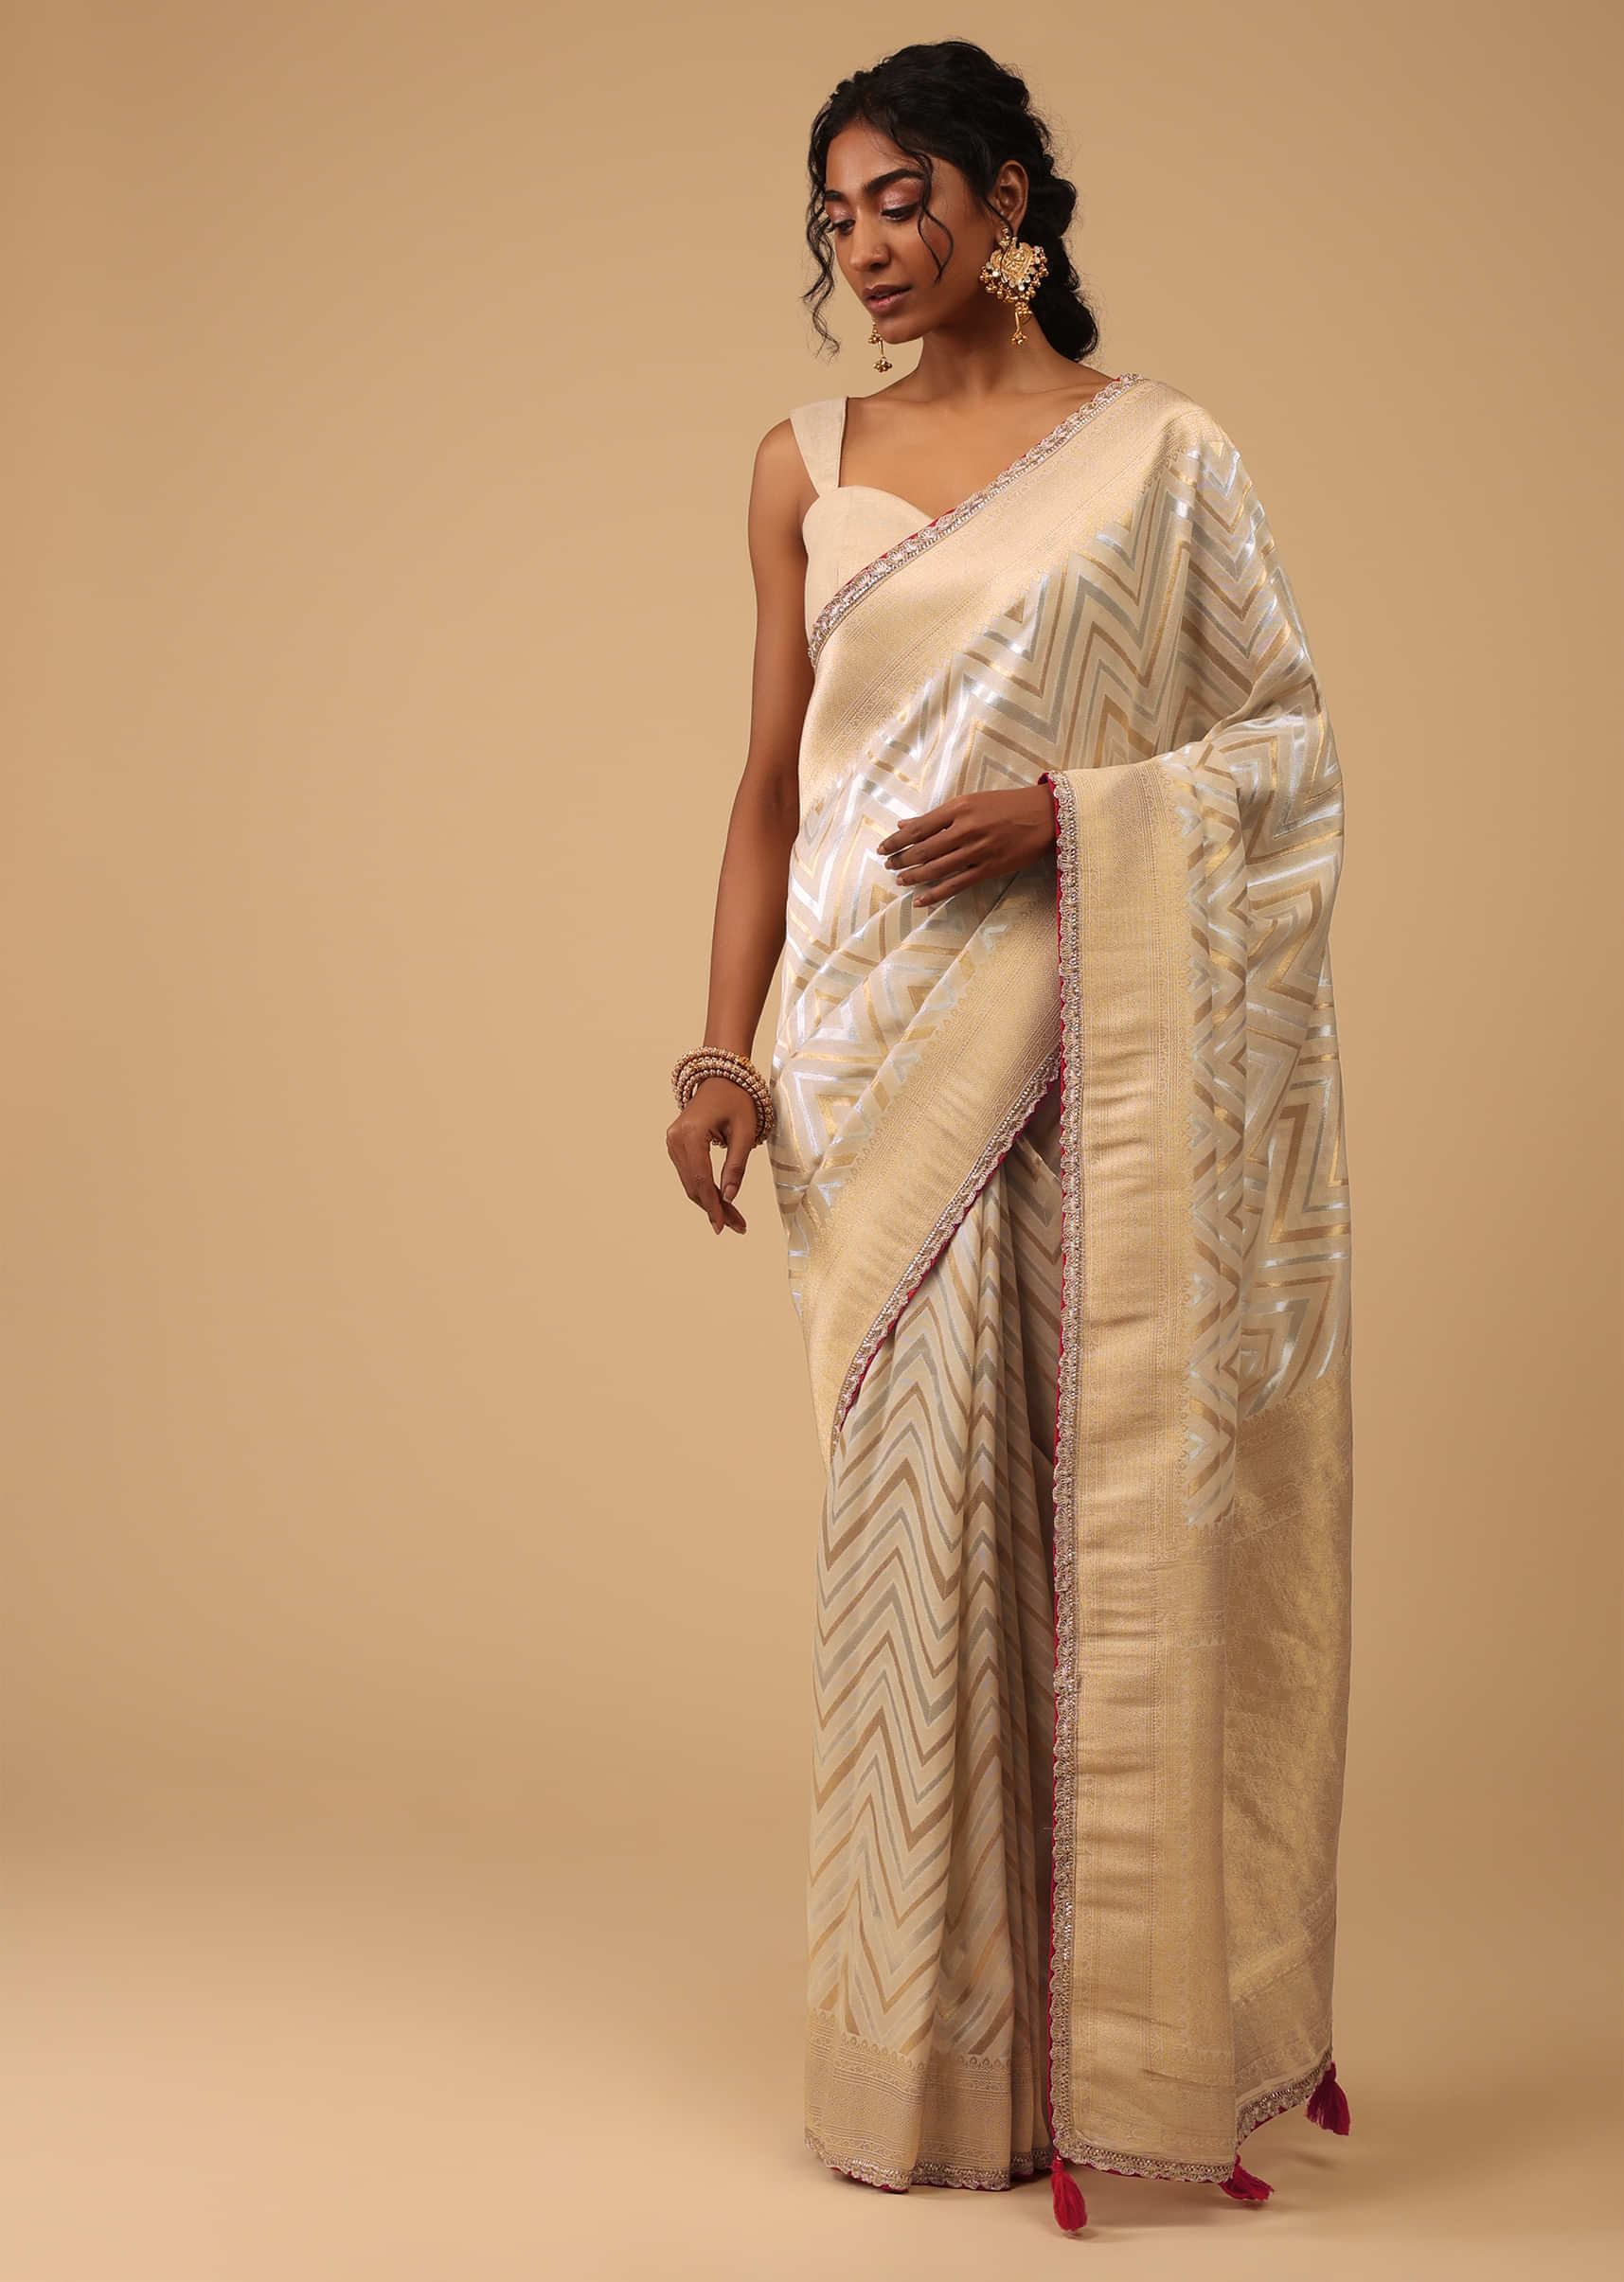 Beautiful off White Soft Lichi Silk Saree With Golden Zari Saree for Women  Indian Traditional Party Wear Festive Daily Wear Sari Blouse - Etsy